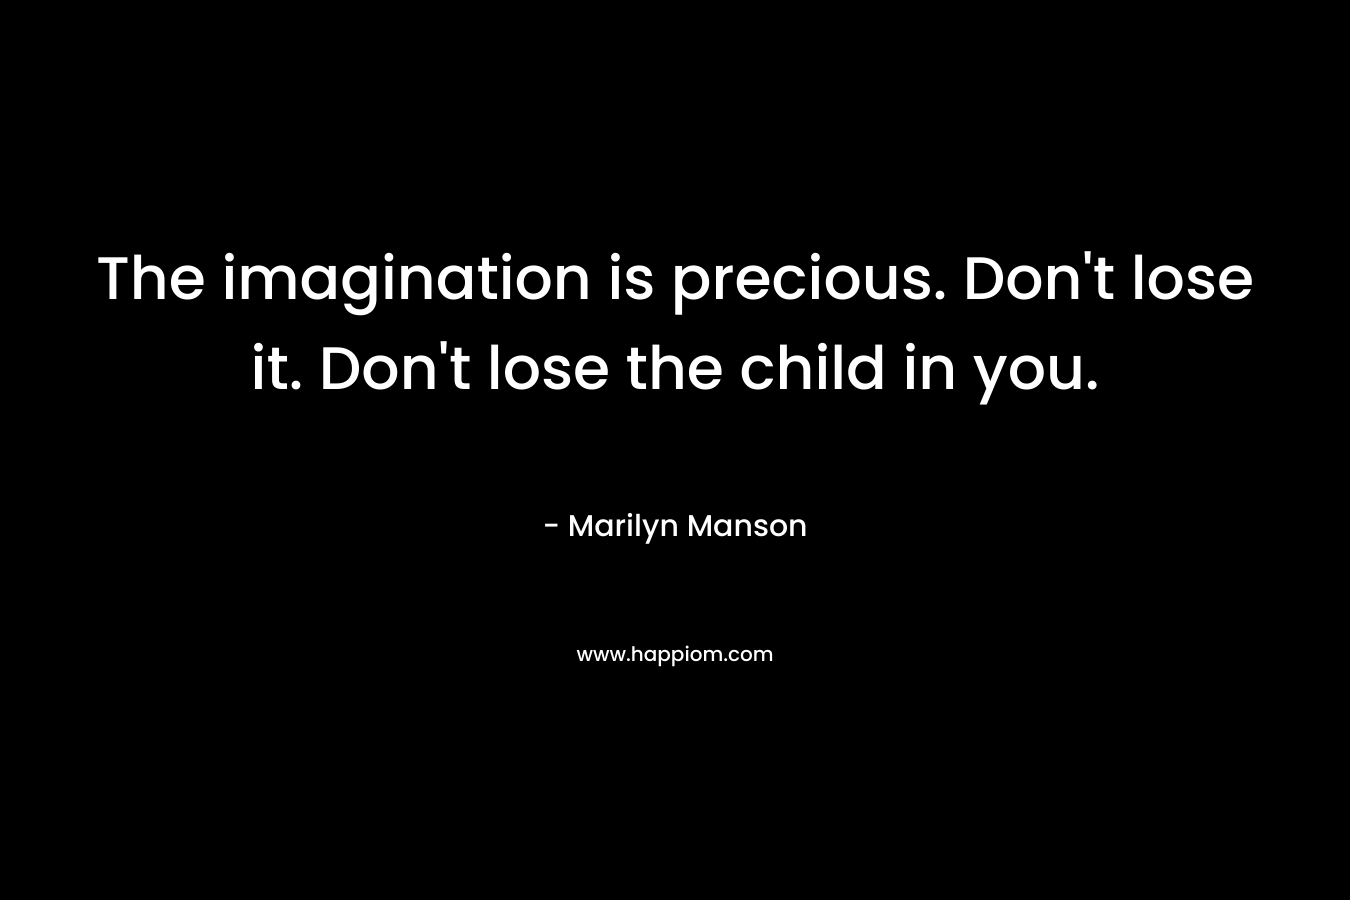 The imagination is precious. Don't lose it. Don't lose the child in you.